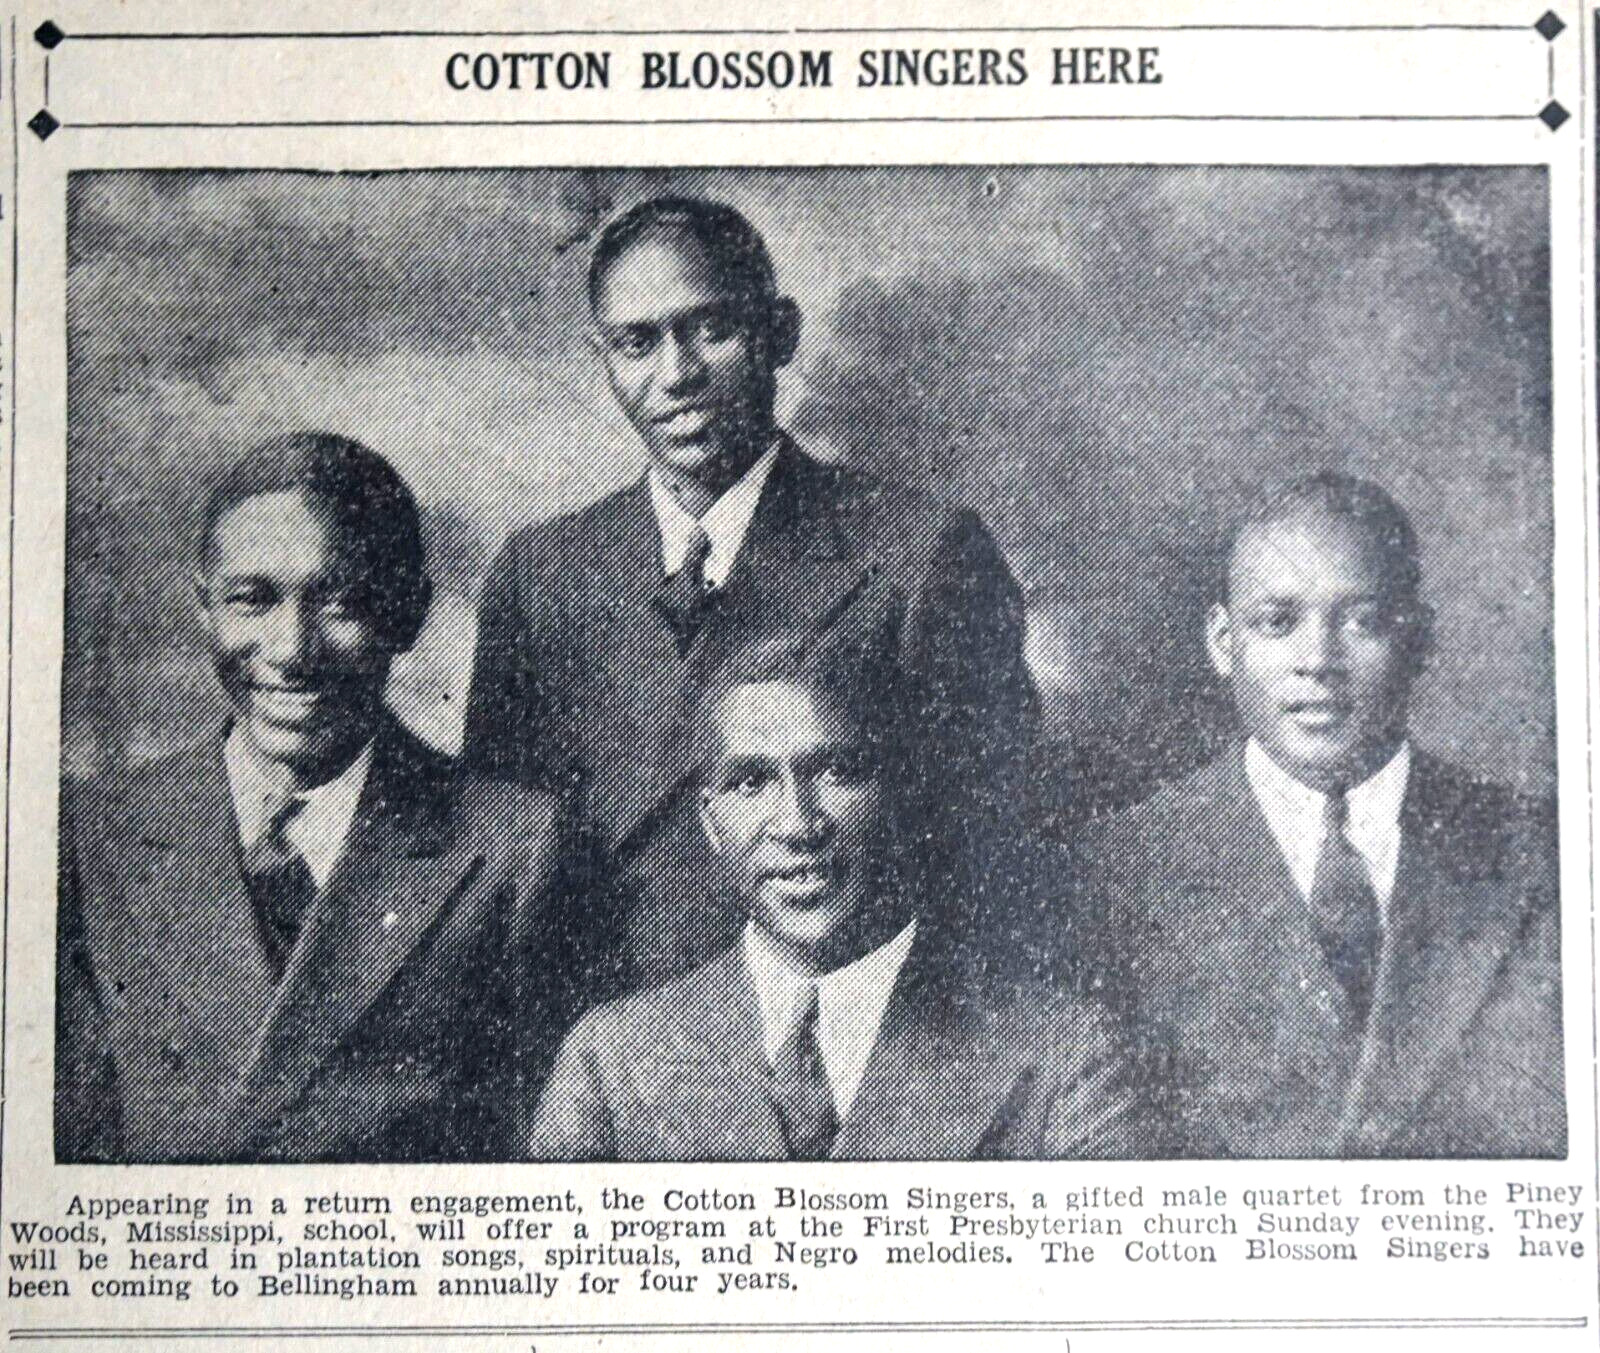 1935 Newspaper Page - African-American Piney Woods Cotton Blossom Singers